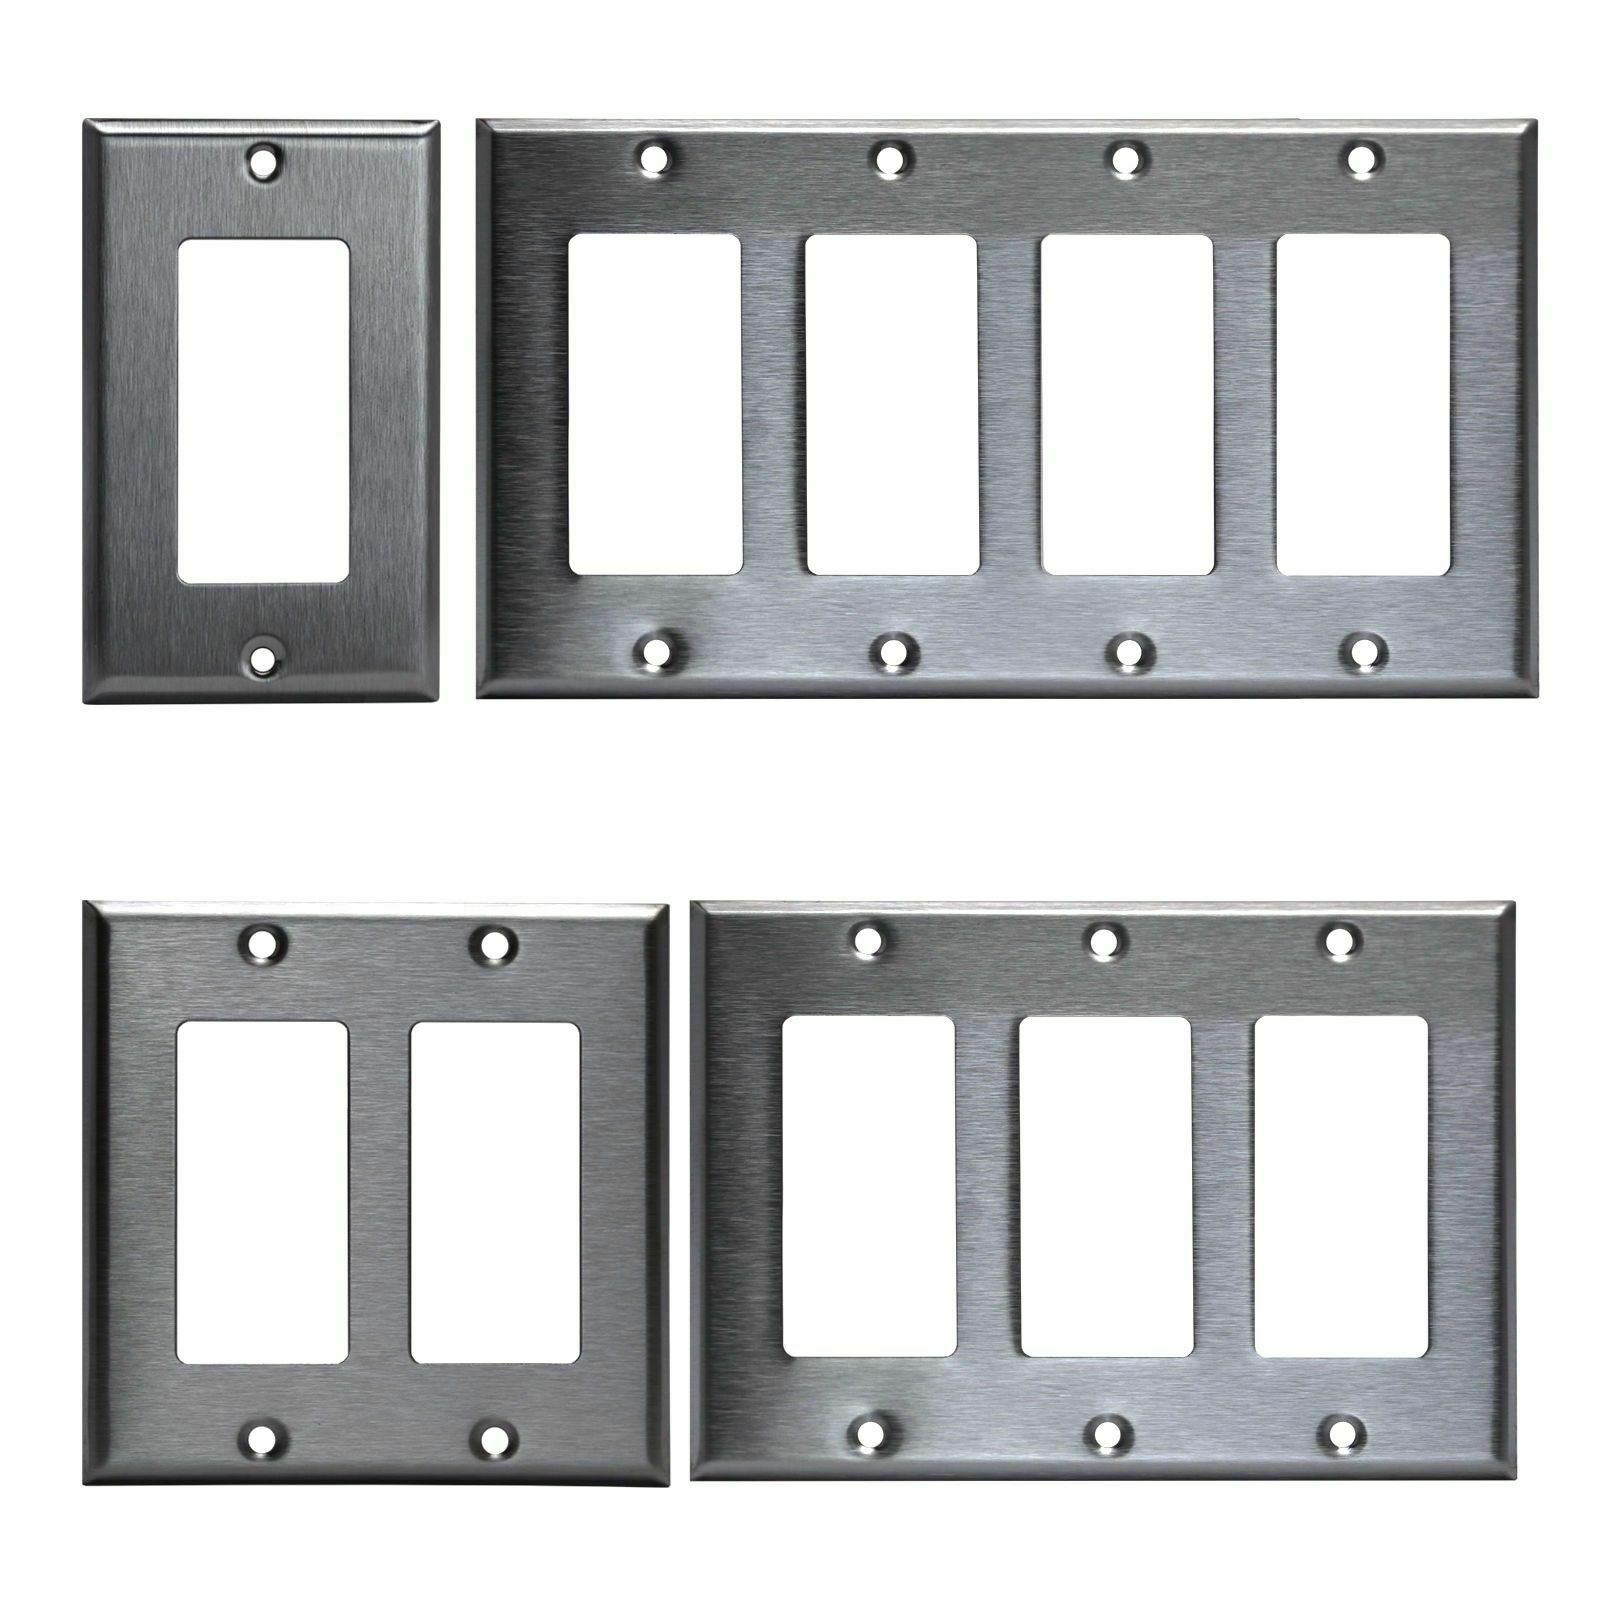 Brushed Stainless Steel Outlet Cover Rocker Switch Wall Plates Decorator Metal